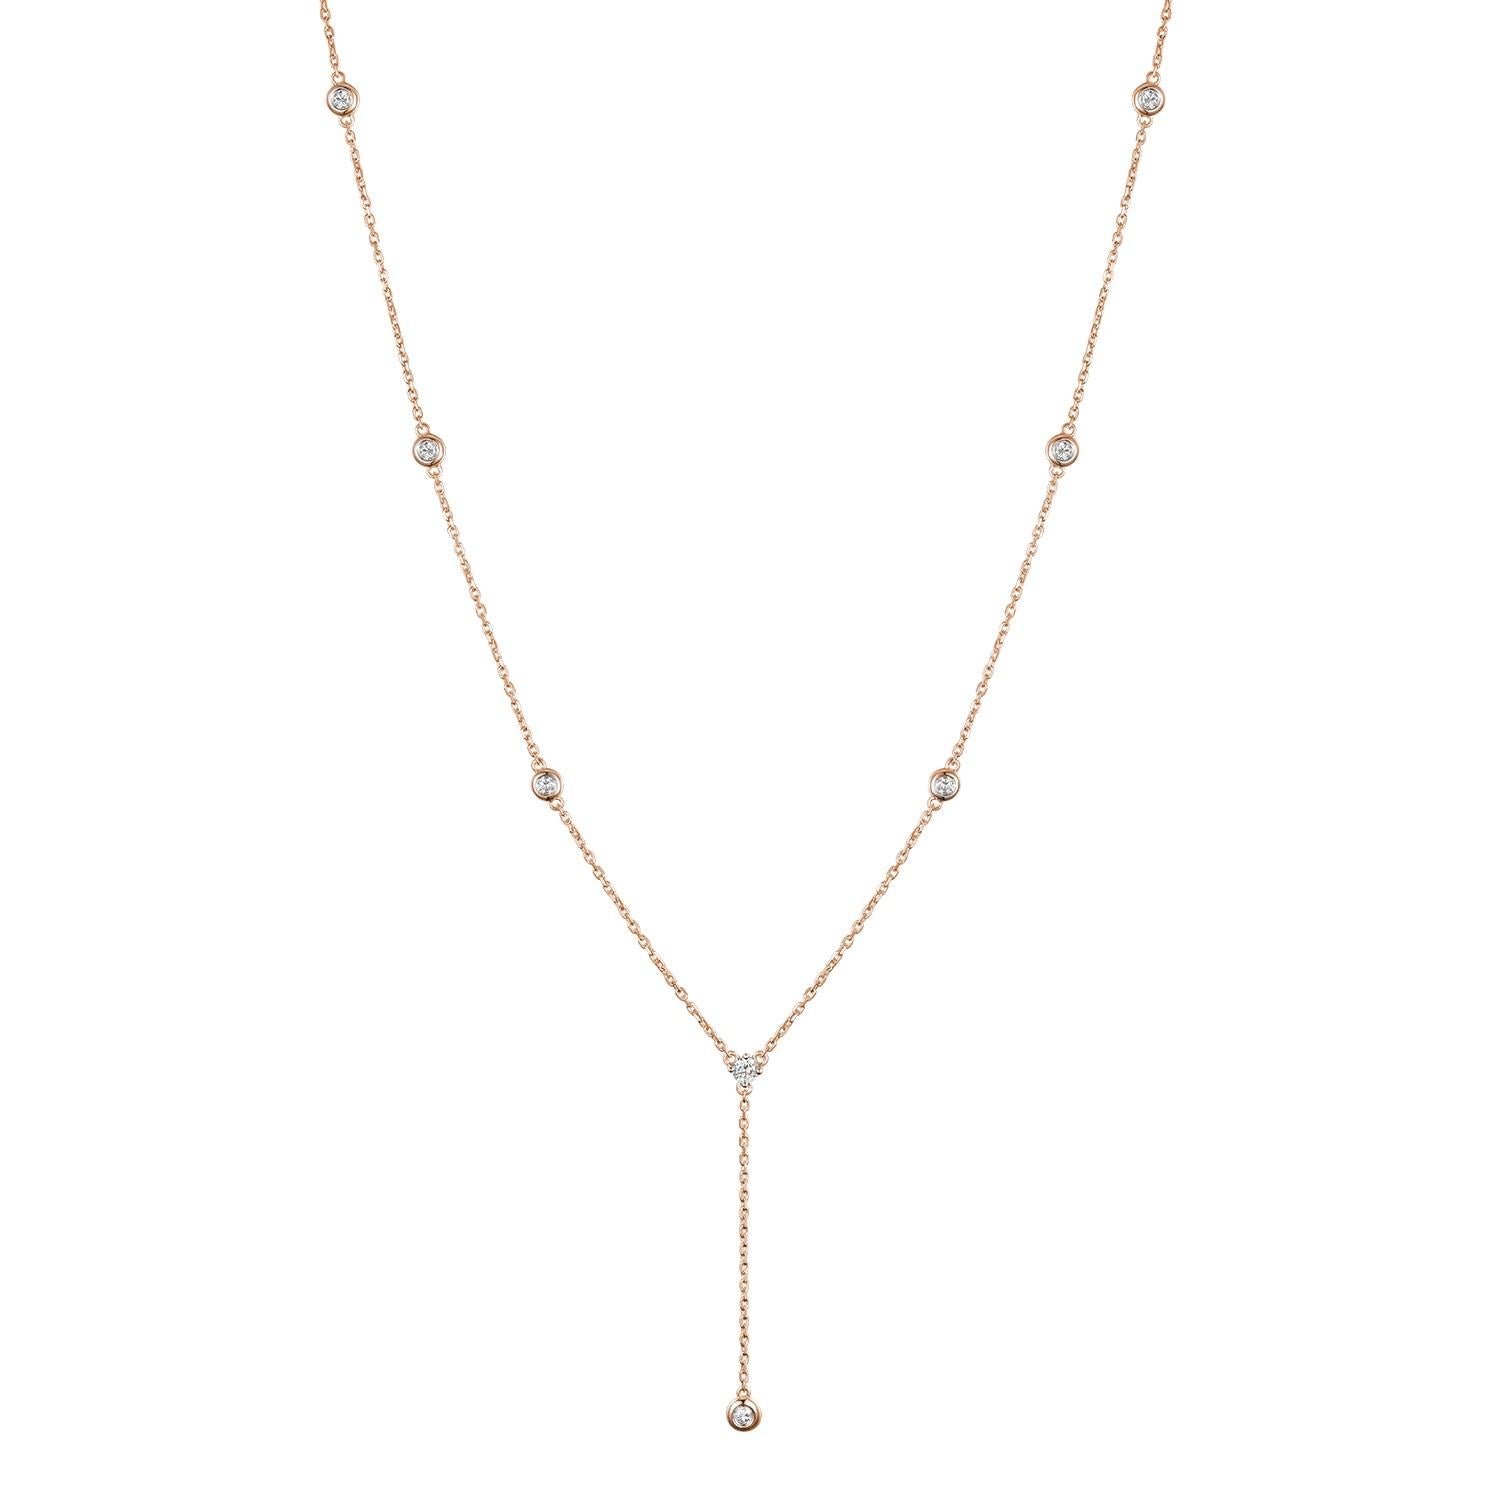 The 14K Rose Gold Diamond Necklace is a versatile and elegant piece of jewelry that effortlessly combines sophistication and charm. This necklace features 0.27 carats of brilliant white round diamonds, adding a timeless sparkle to any outfit. Set in